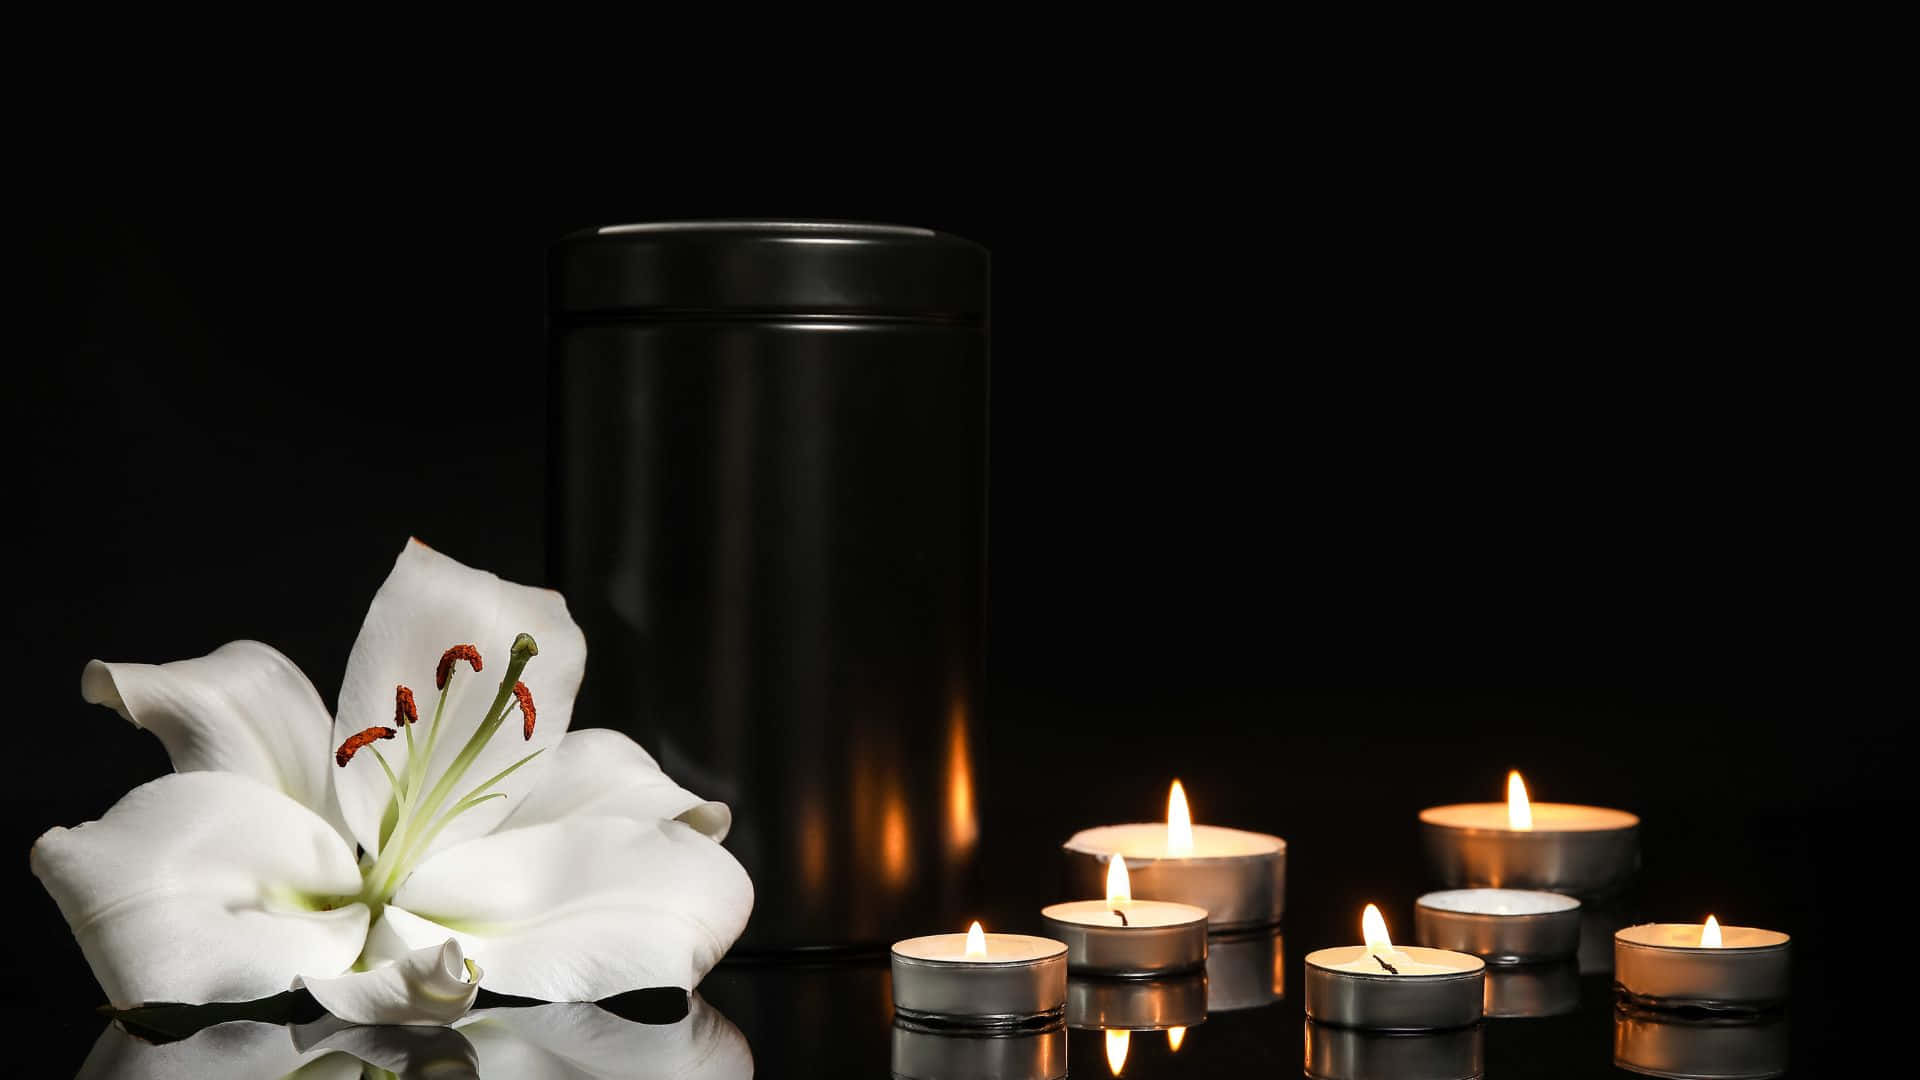 A Black Urn With Candles And A White Lily